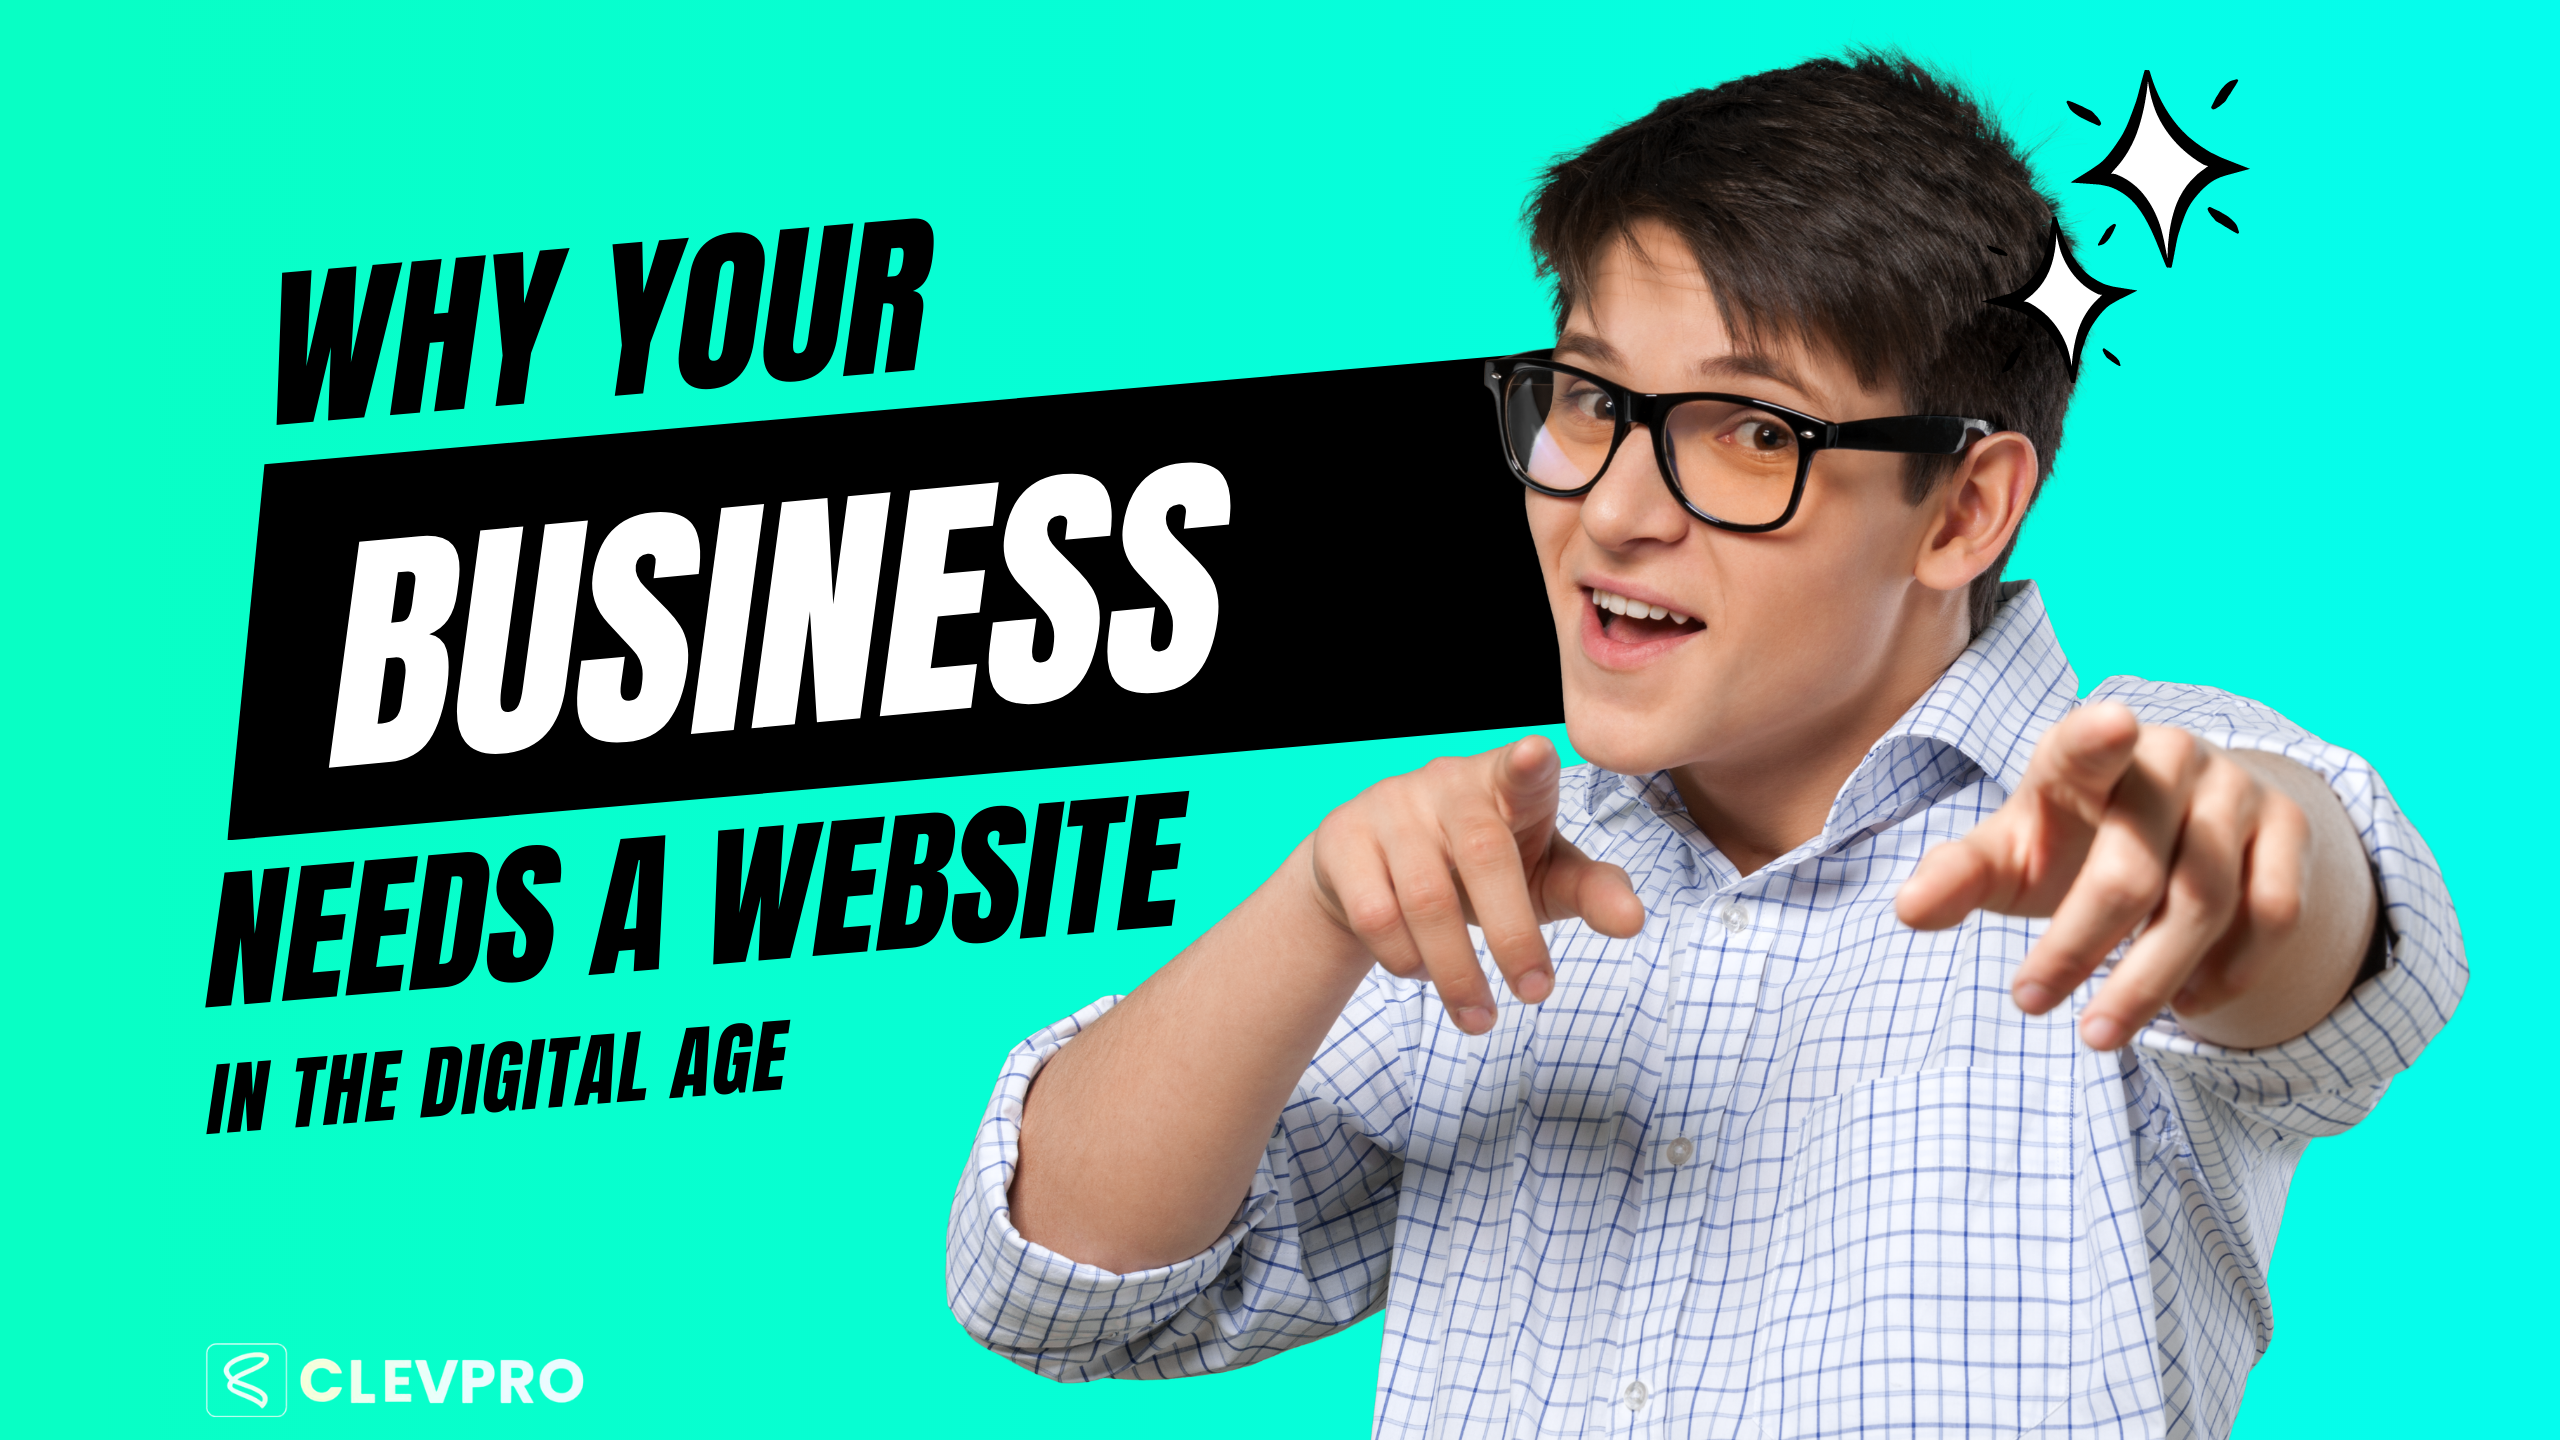 Why Your Business Needs a Website in the Digital Age